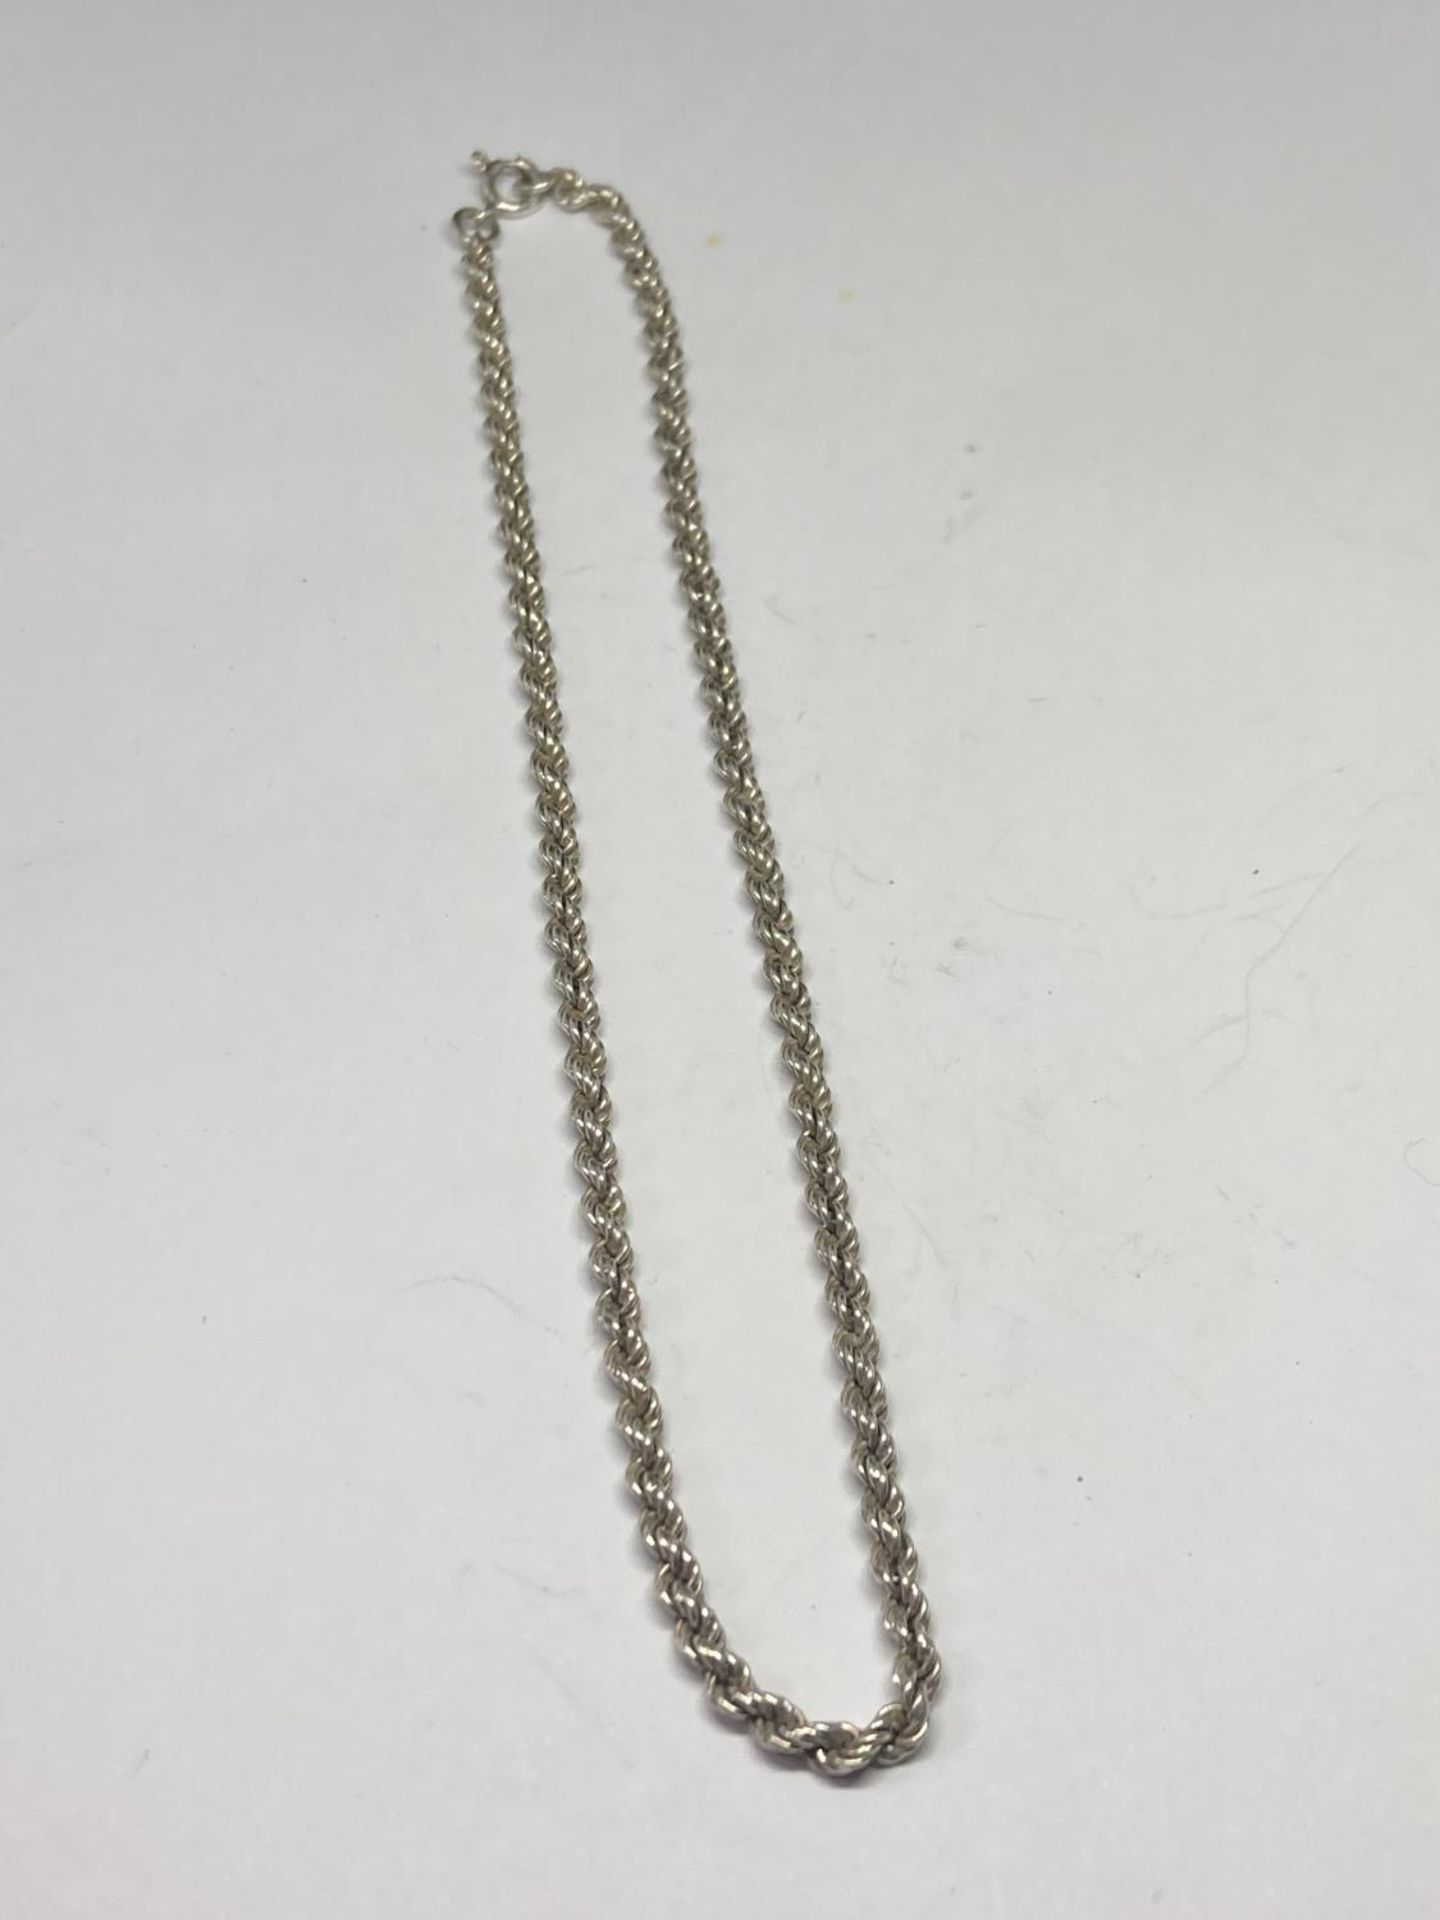 A SILVER ROPE NECKLACE LENGTH 16"